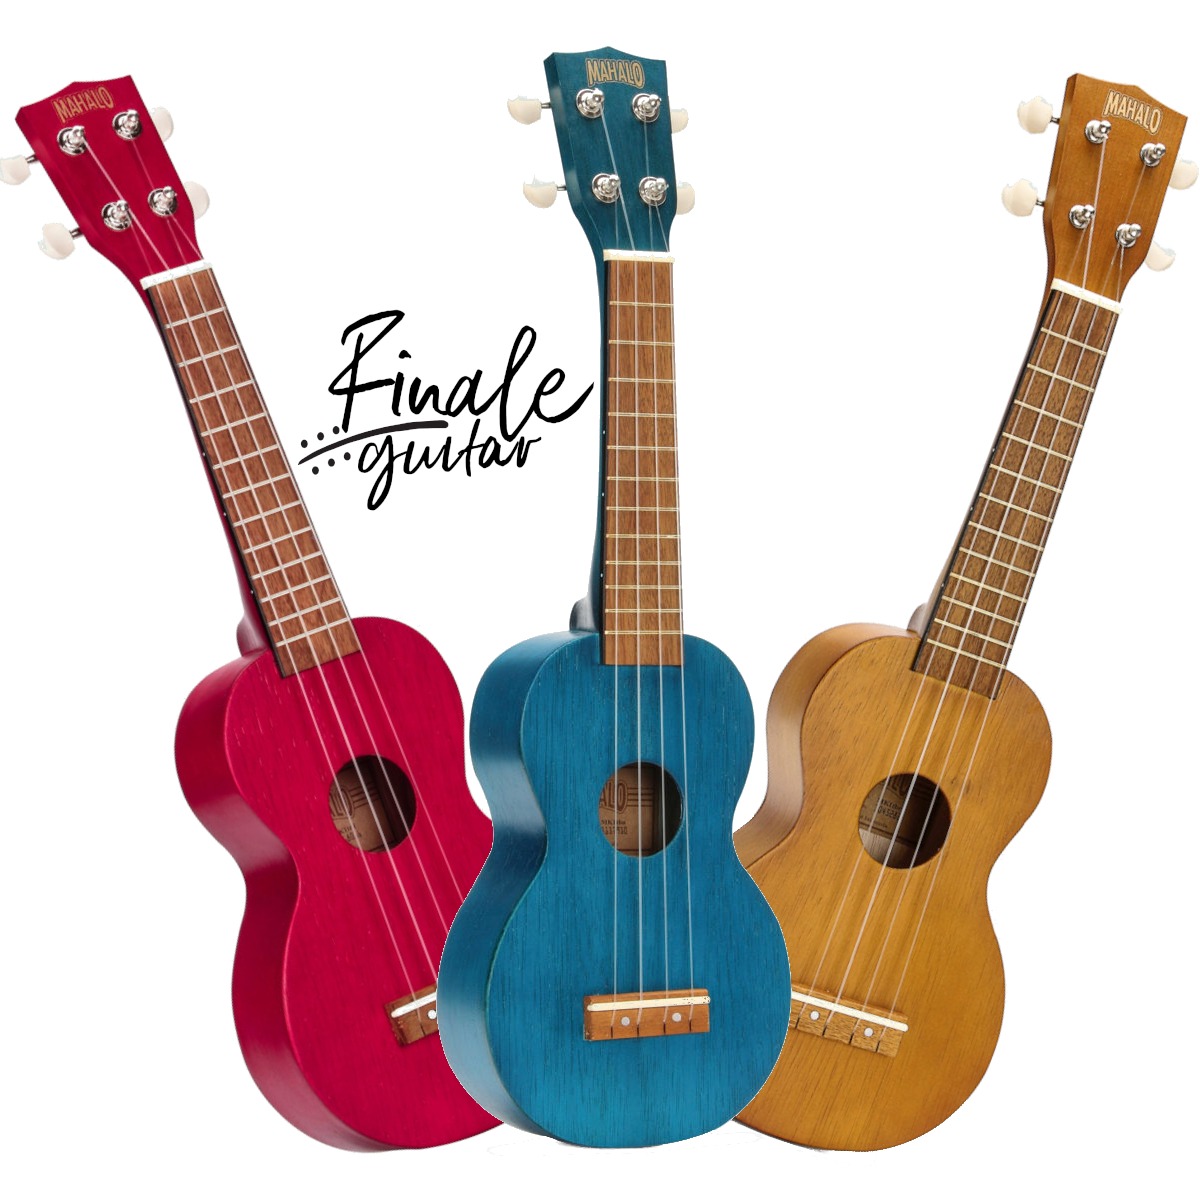 The best beginner soprano ukuleles - Mahalo Kahiko in red, blue or brown